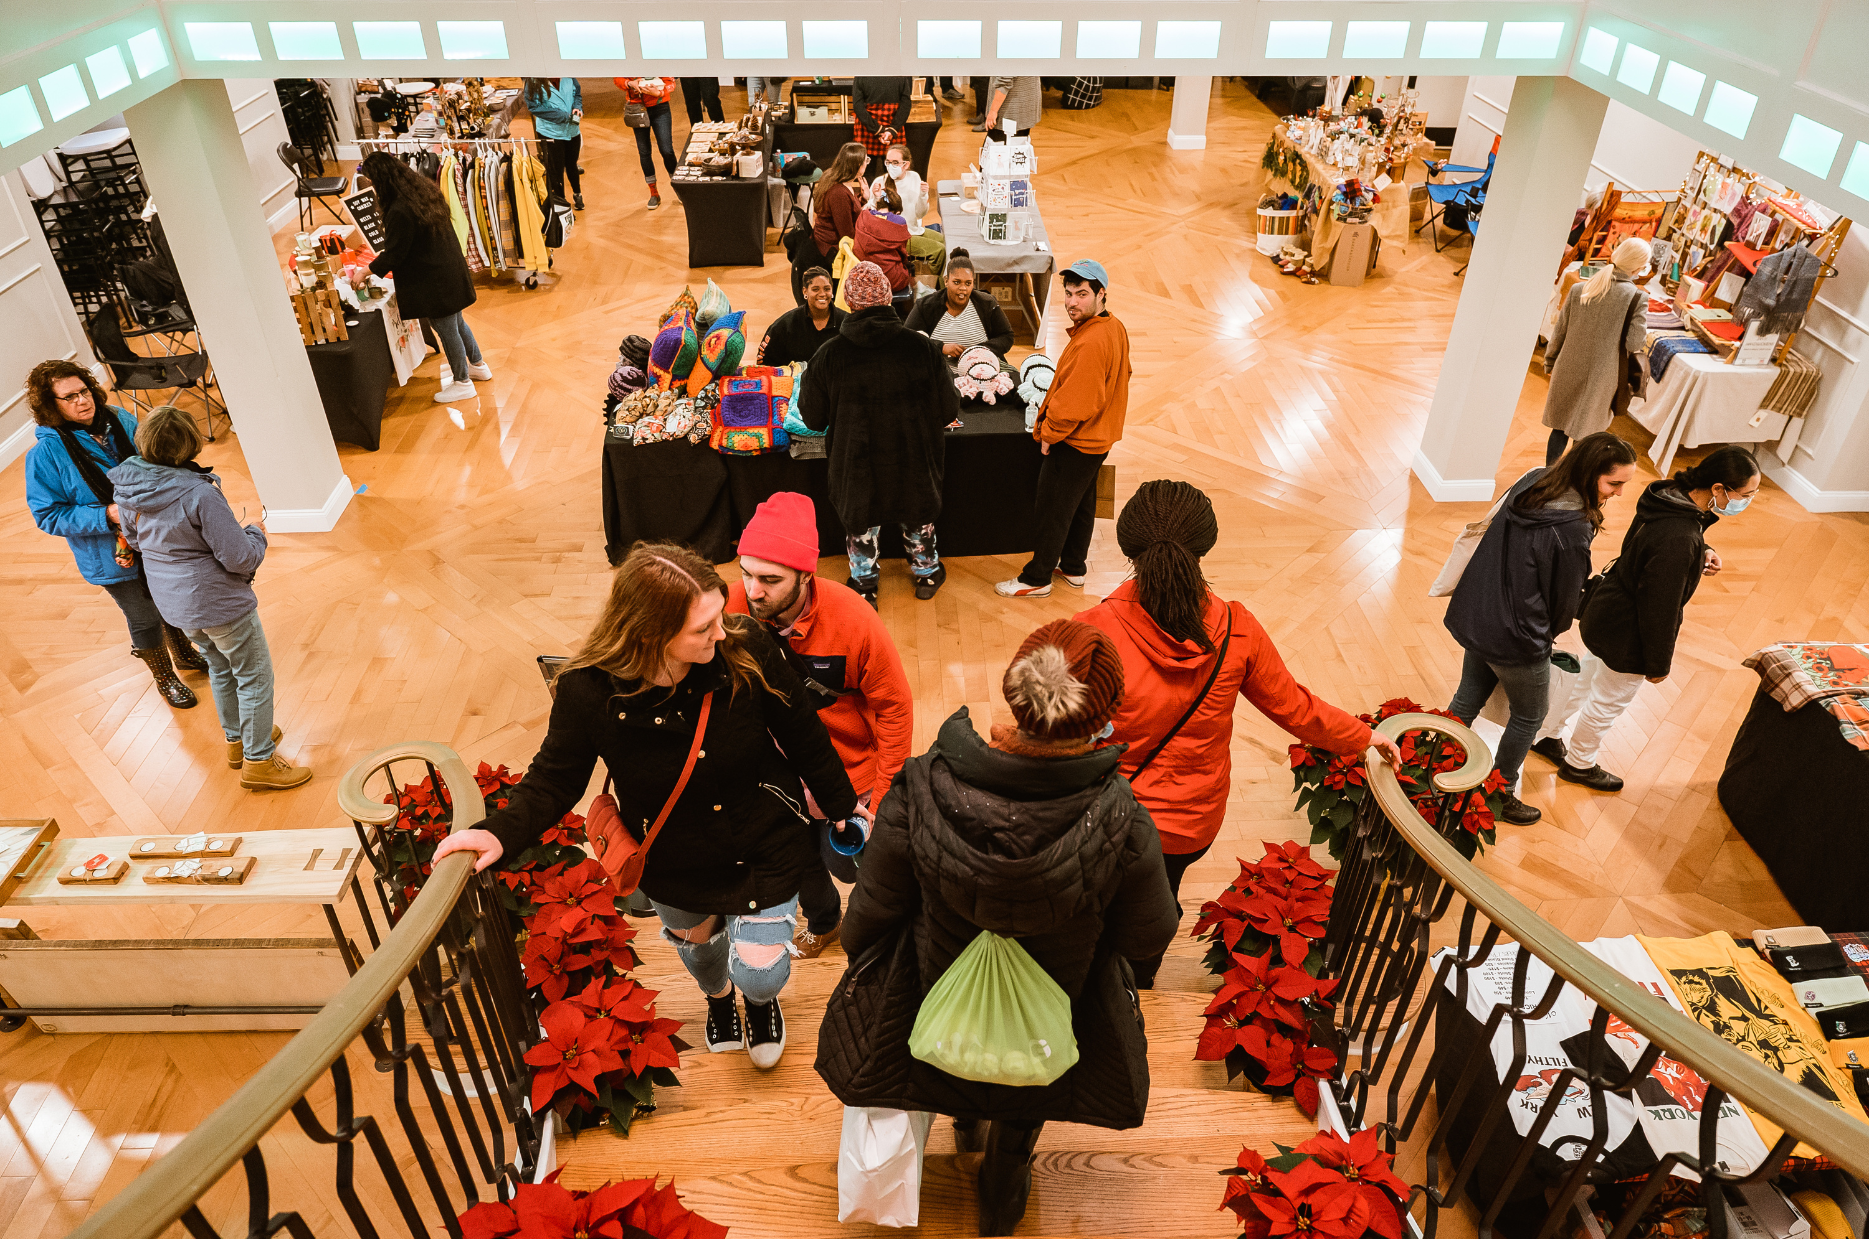 Holiday shoppers explore an indoor market set in a ballroom.